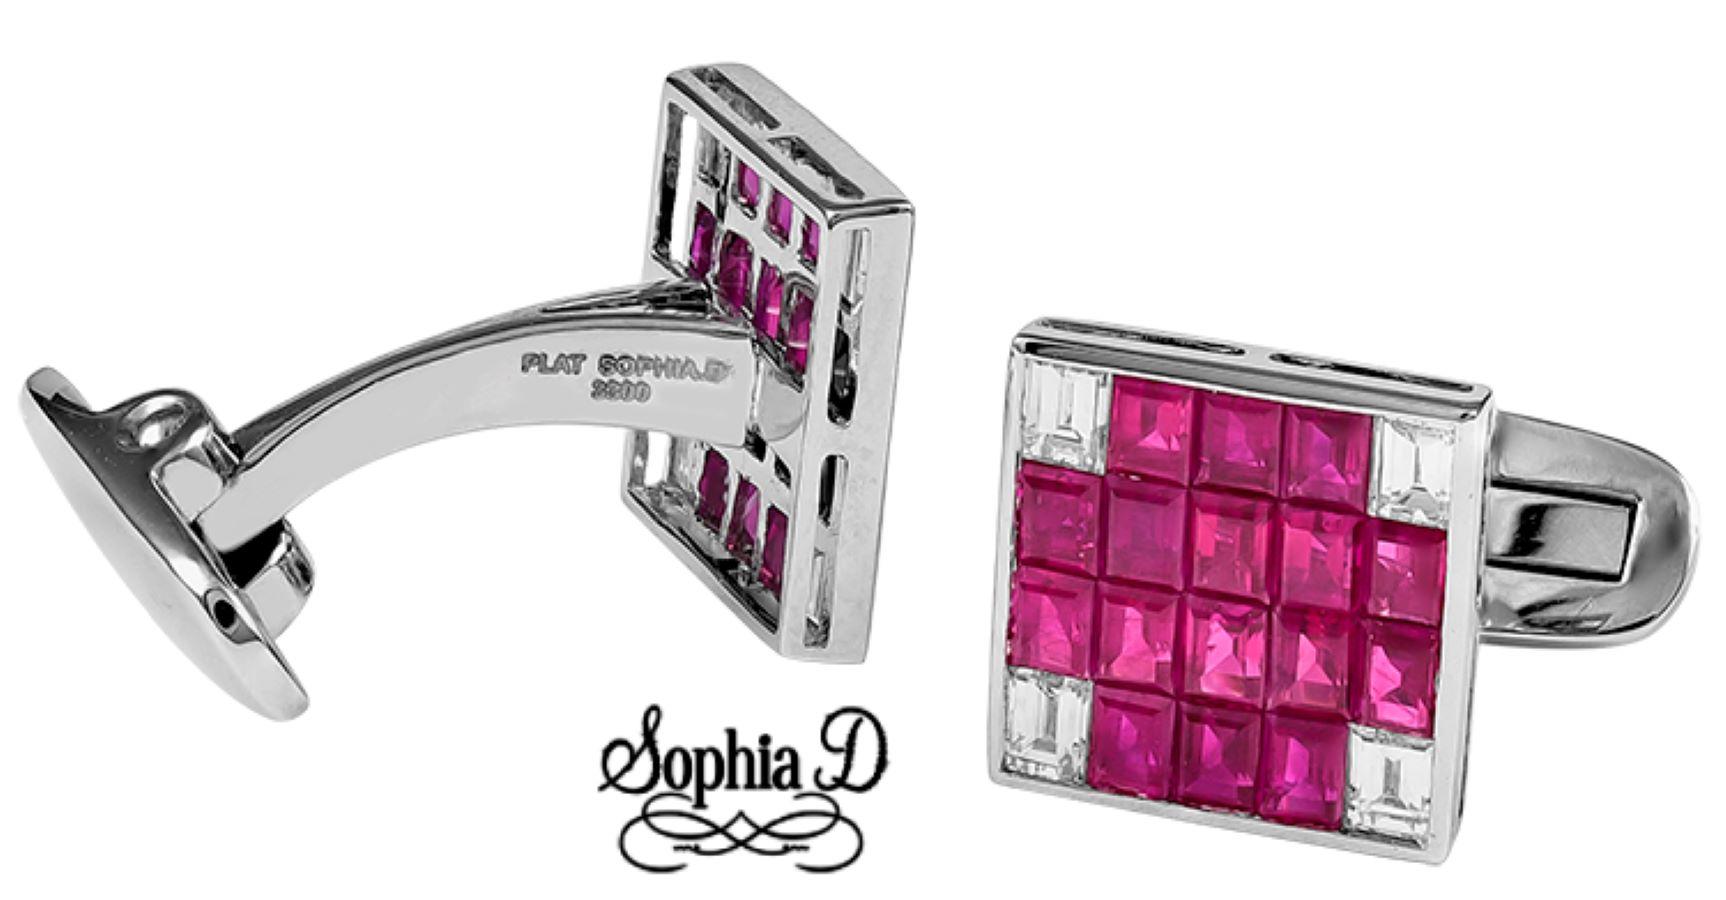 Sophia D. cufflinks with 3.16 carats and 0.79 carats diamonds set in platinum.

Sophia D by Joseph Dardashti LTD has been known worldwide for 35 years and are inspired by classic Art Deco design that merges with modern manufacturing techniques. 